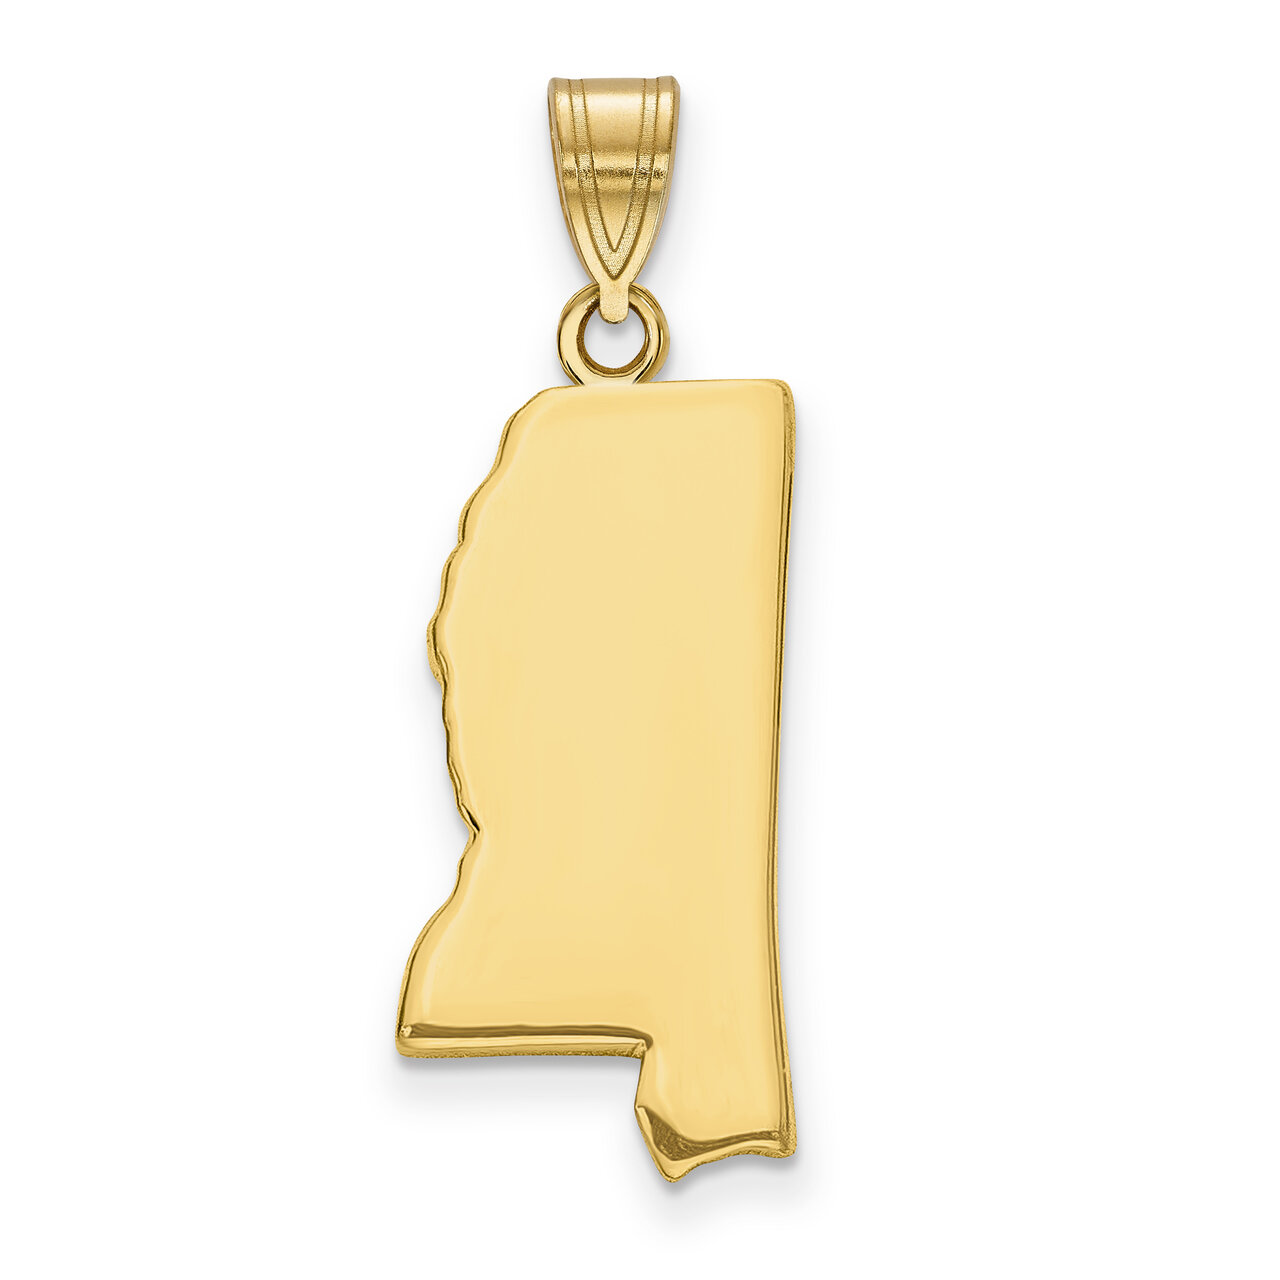 Mississippi State Pendant Charm Gold-plated on Silver Engravable XNA707GP-MS